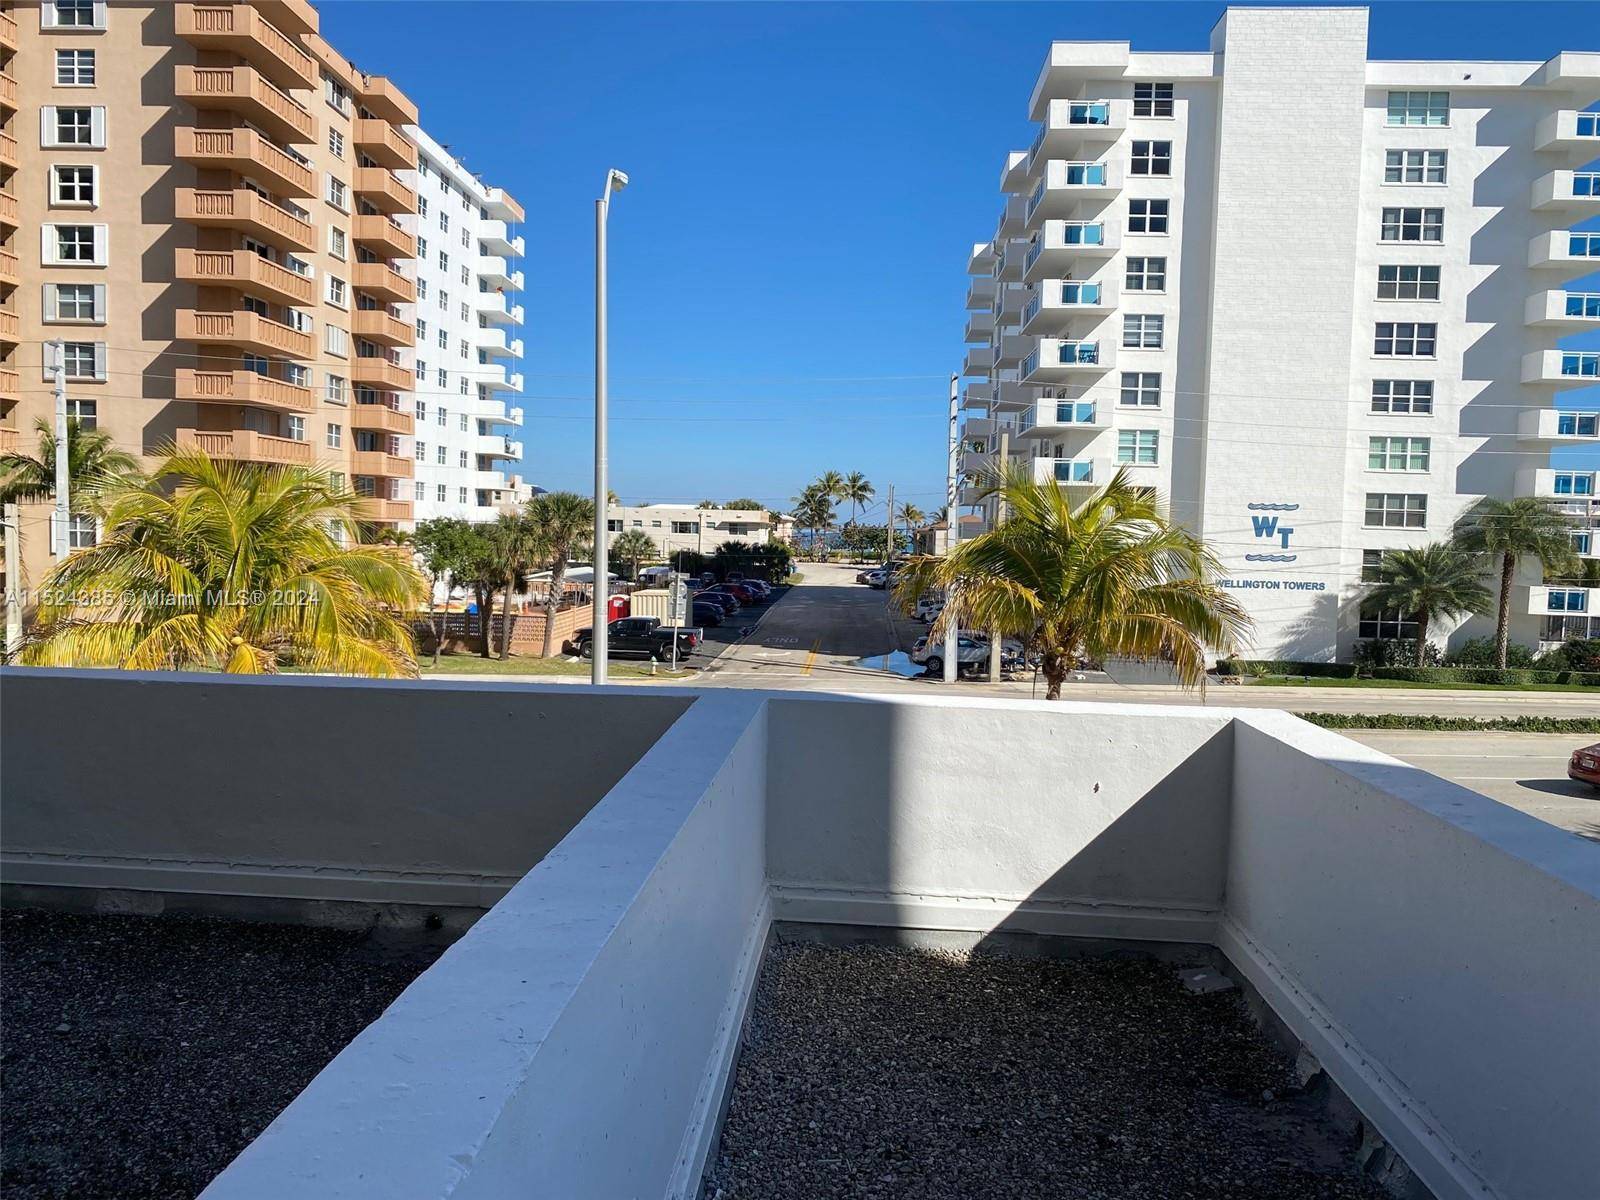 GREAT LOCATION 2BR 2BA WALK TO HOLLYWOOD BEACH PERFECTLY LOCATED ON A1A OCEAN DRIVE UNIT FACING EAST, CENTRAL AIR AND HEAT NICE BALCONY SWIMMING POOL BARB Q AT POOL AREA ...